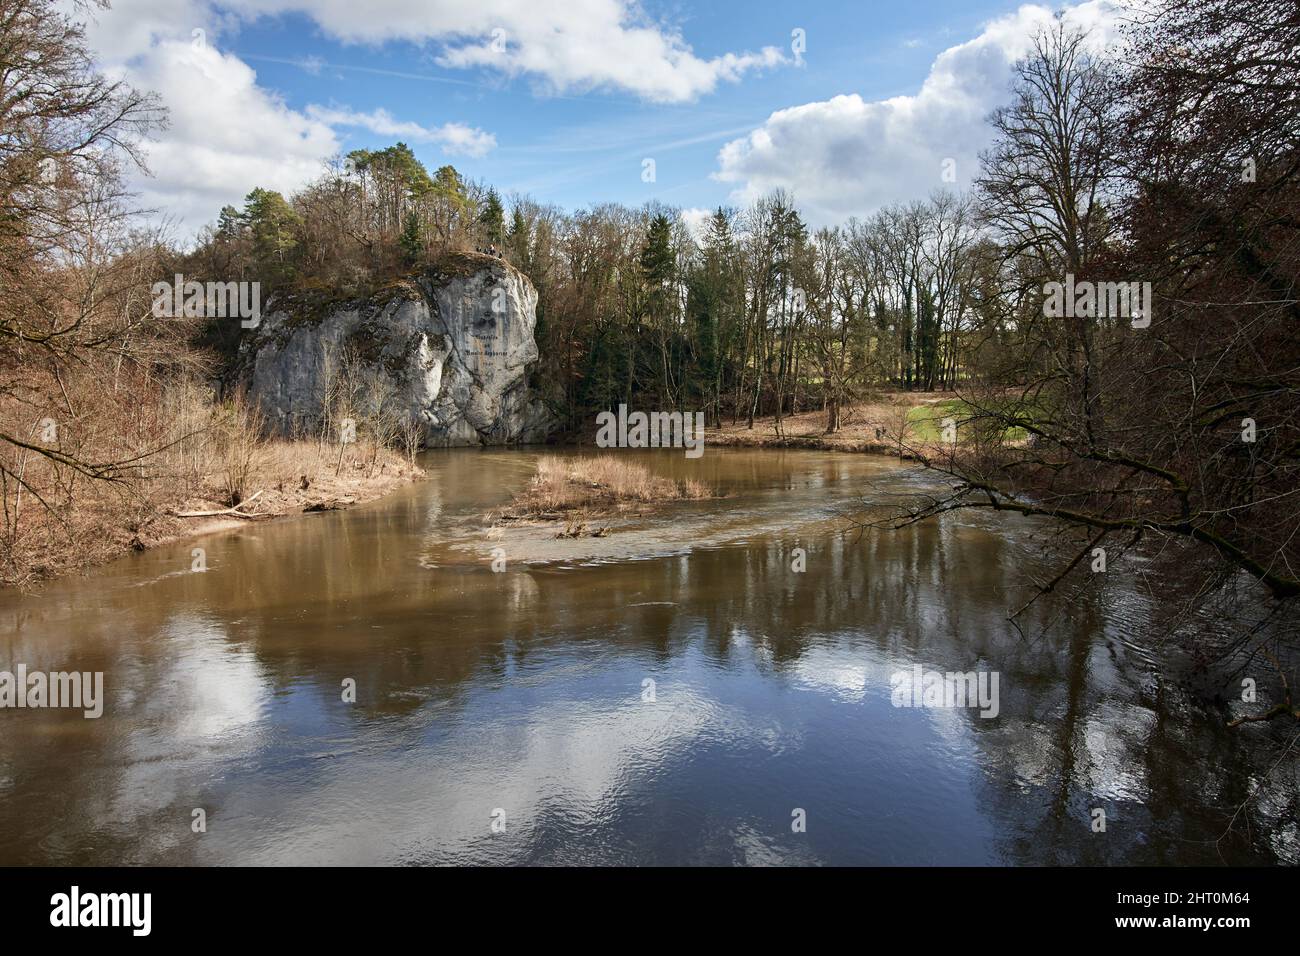 Amalienfelsen rock at the Danube river in the Princely Park near Inzigkofen, Sigmaringen, Germany, Europe. Stock Photo